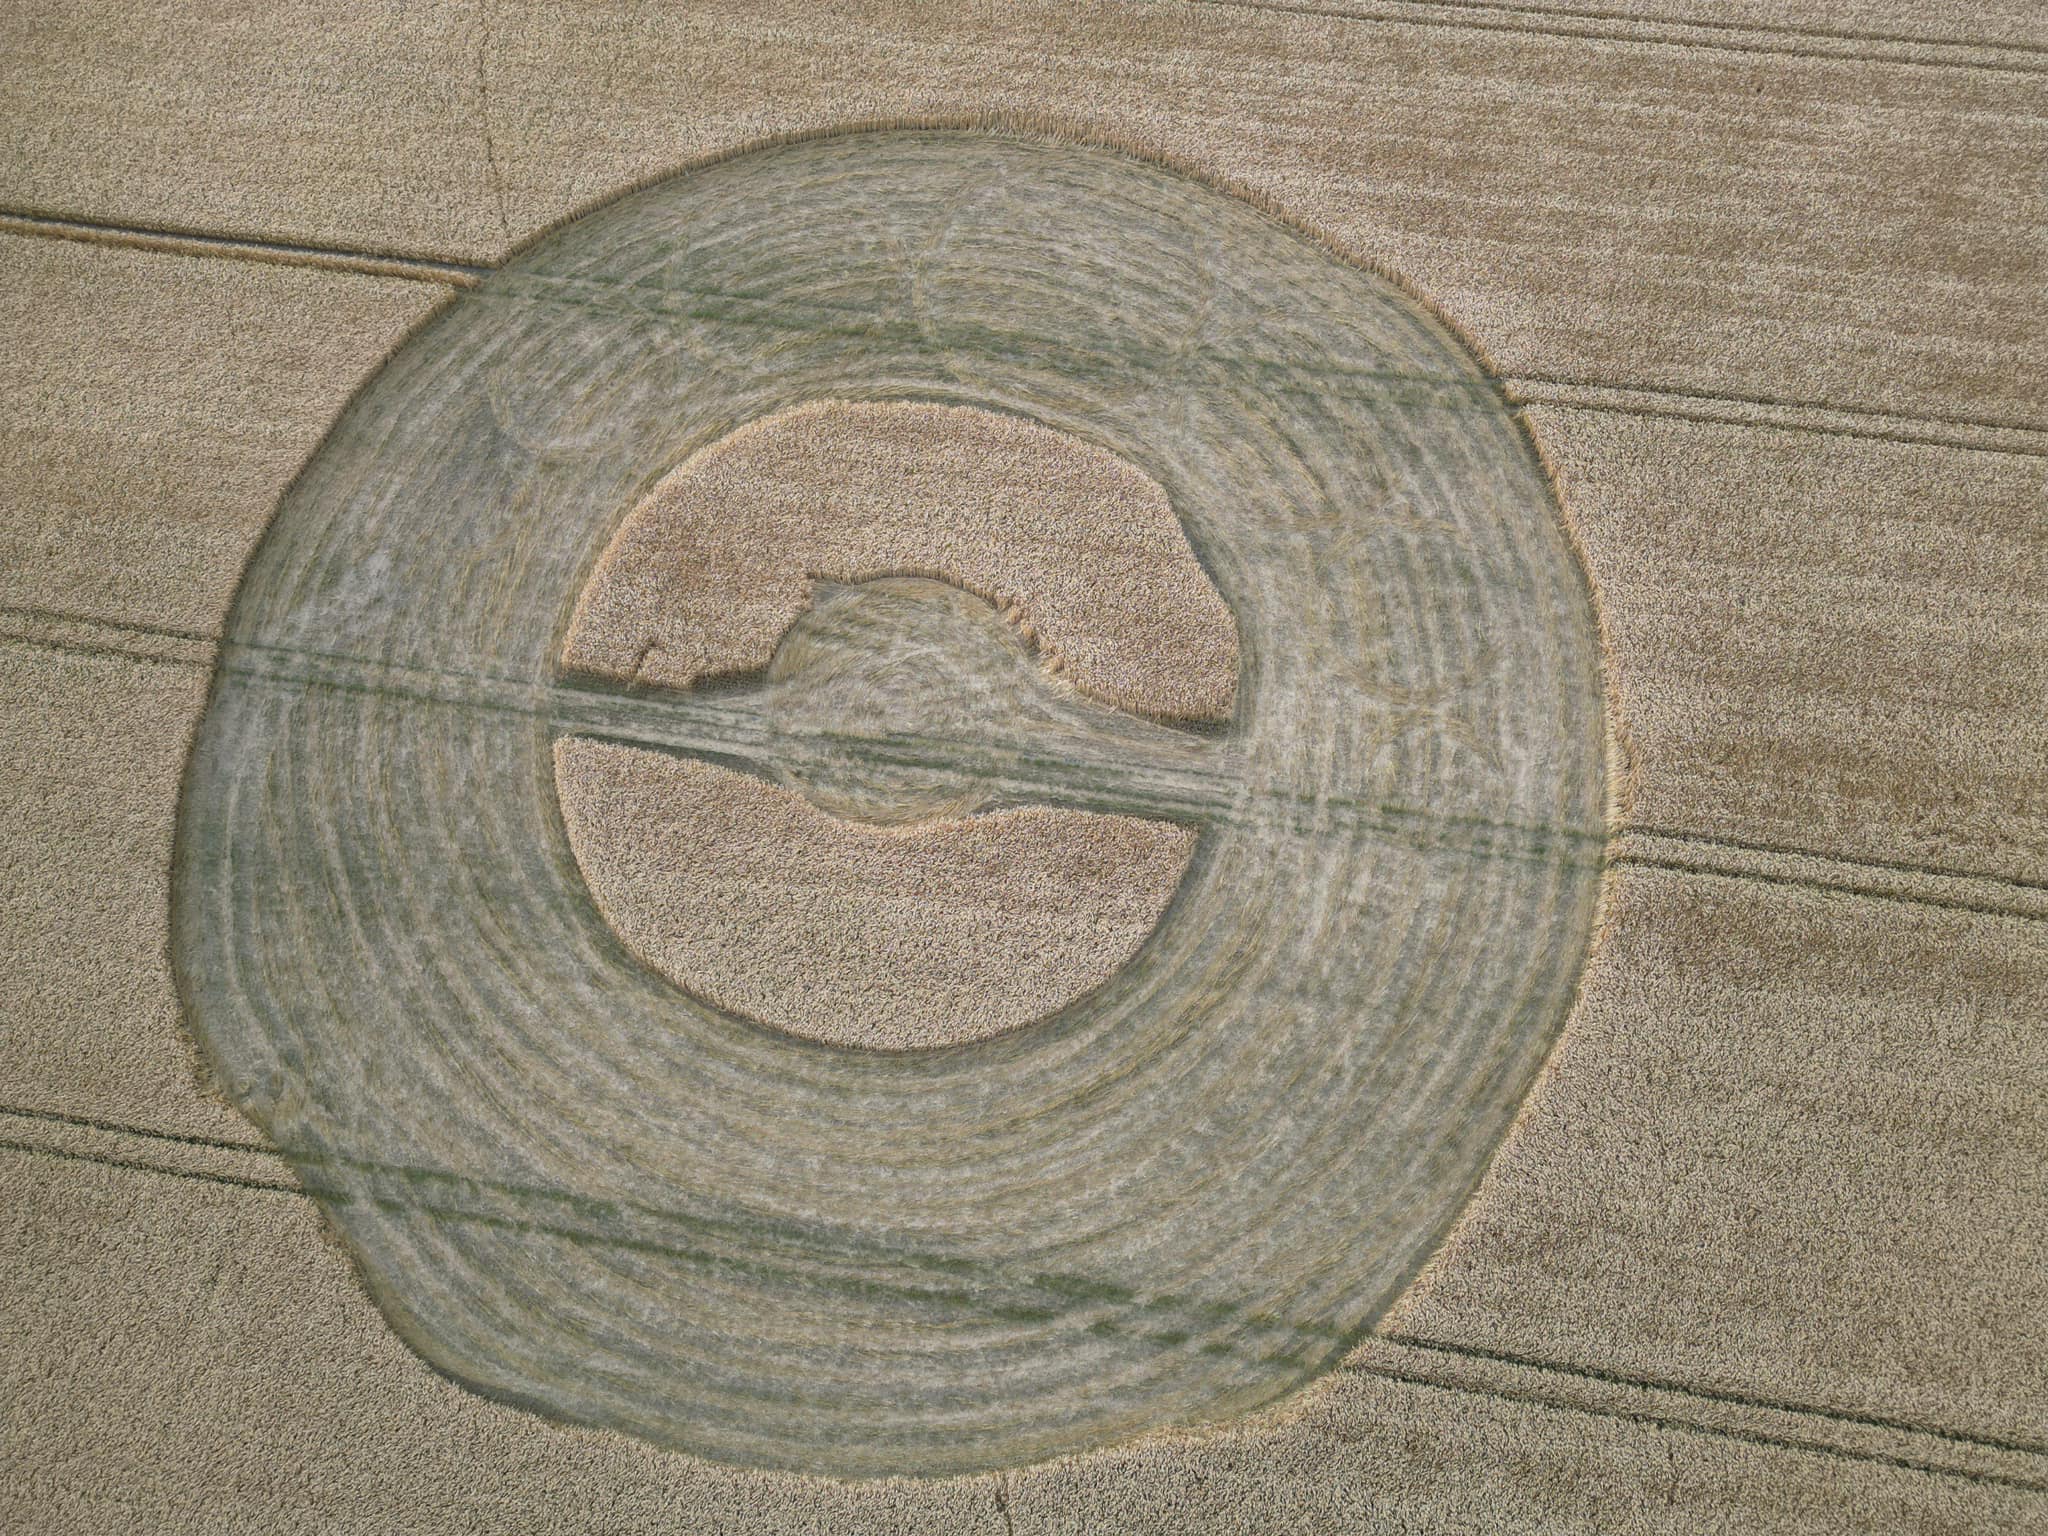 A color photograph taken from an aerial view of a crop circle in the shape of a lumpy wide ring of flattened crop where several rings are visible within the flattened part with a center lumpy circle of upright crop. The circle of upright grass is divided by an off-center horizontal line of flattened crop with a small circle of flattened crop at the center. 3 evenly spaced sets of 2 lines are visible through the crop circle and in the field surrounding the crop circle.